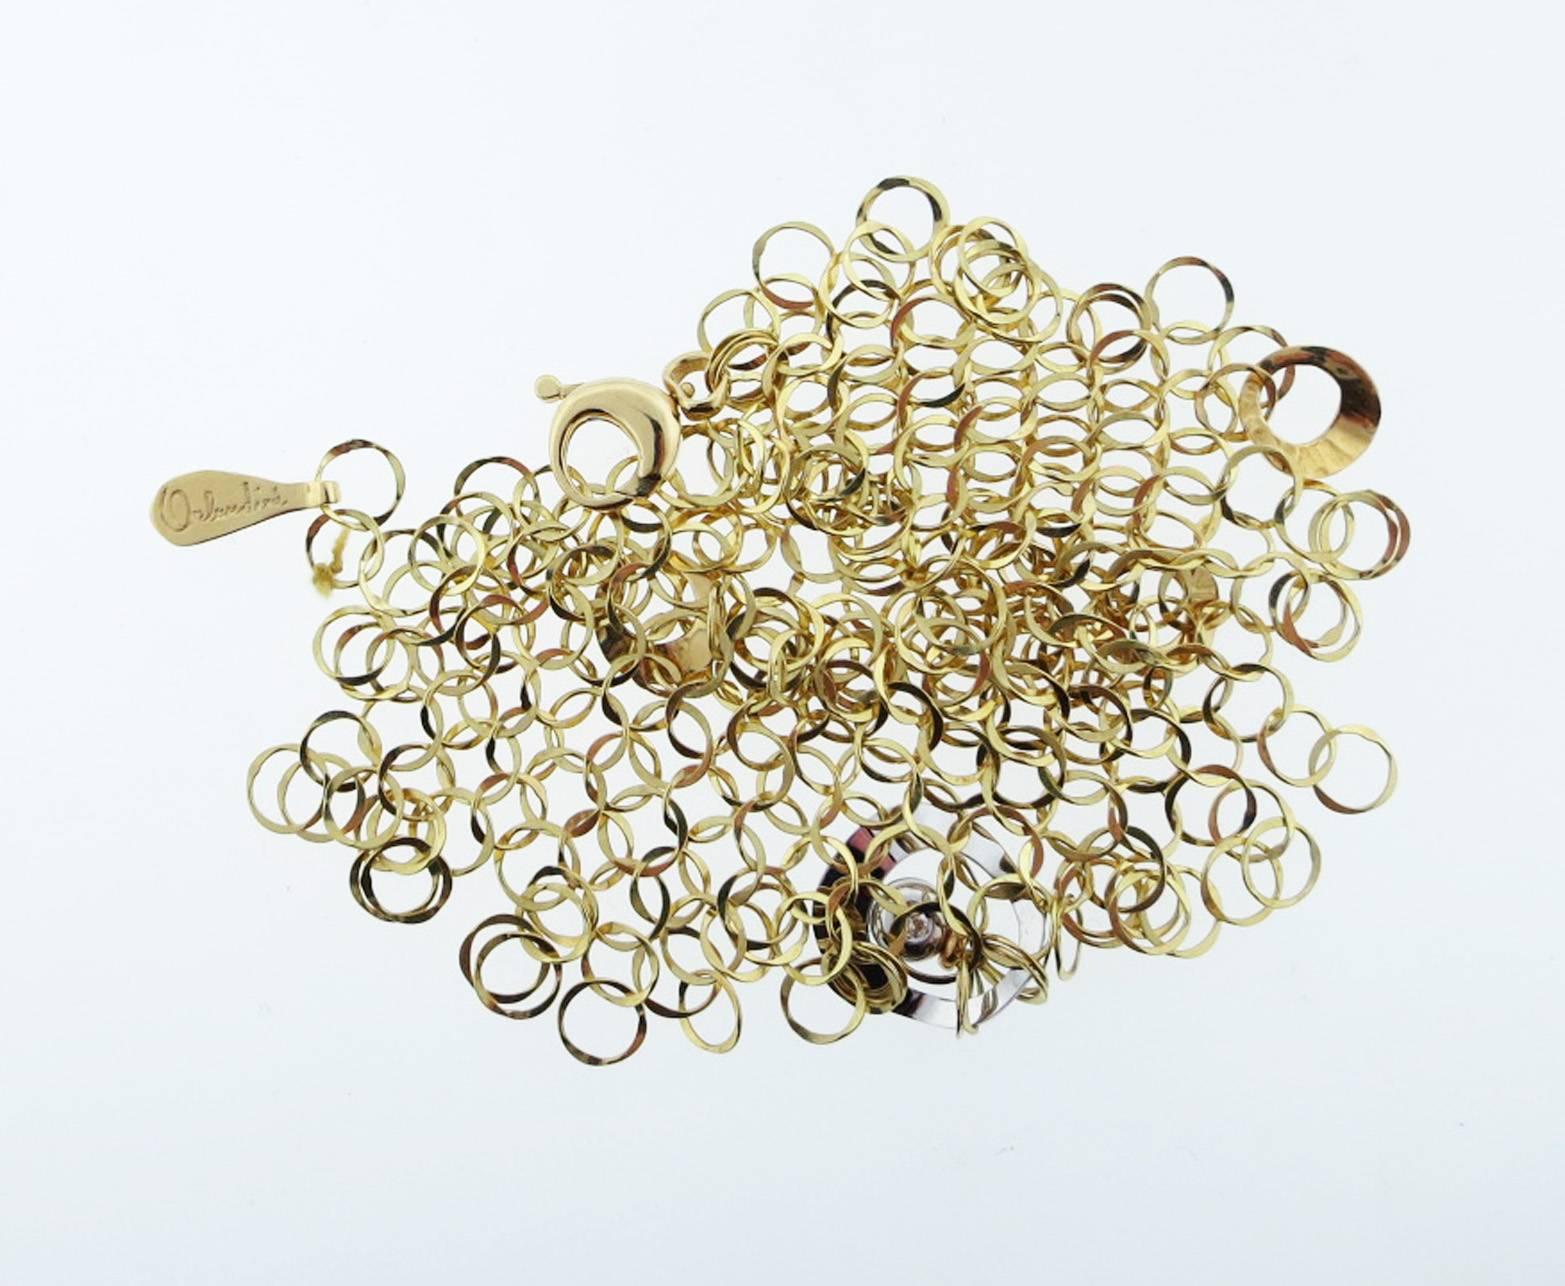 Incredibly constructed 18kt yellow gold fluid bracelet made by the Italian jeweler Orlando Orlandini. The flowing hand hammered interlocking links have a diamond  bezel set charm accent in white gold. The bracelet measures 2 inches at the center and